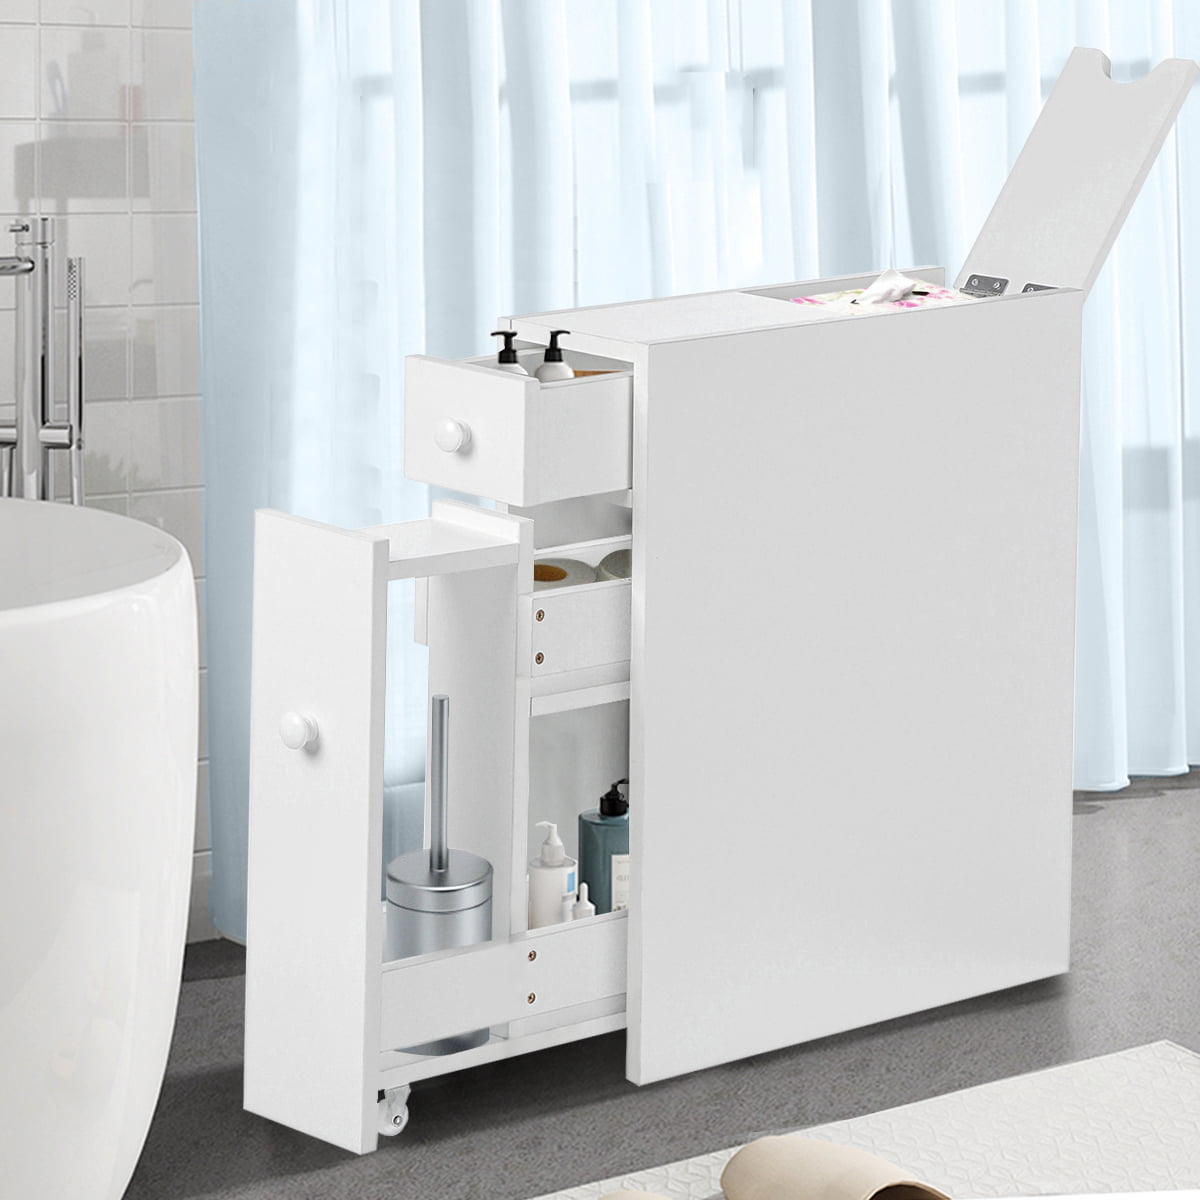 Insma Wooden Bathroom Floor Cabinet, Small Floor Cabinet With Drawers